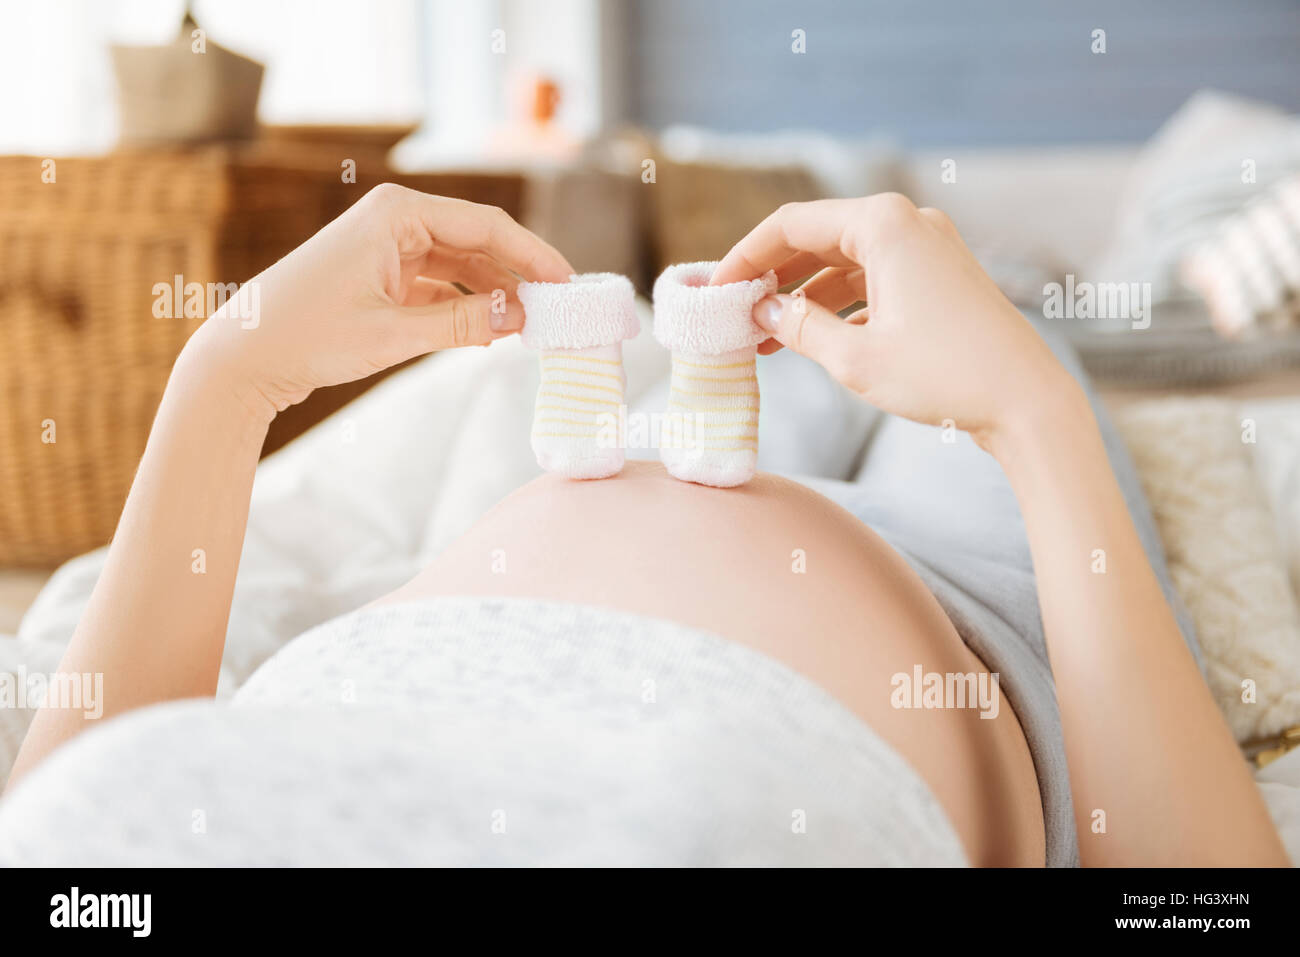 Close up of a pregnant woman demonstrating baby socks Stock Photo